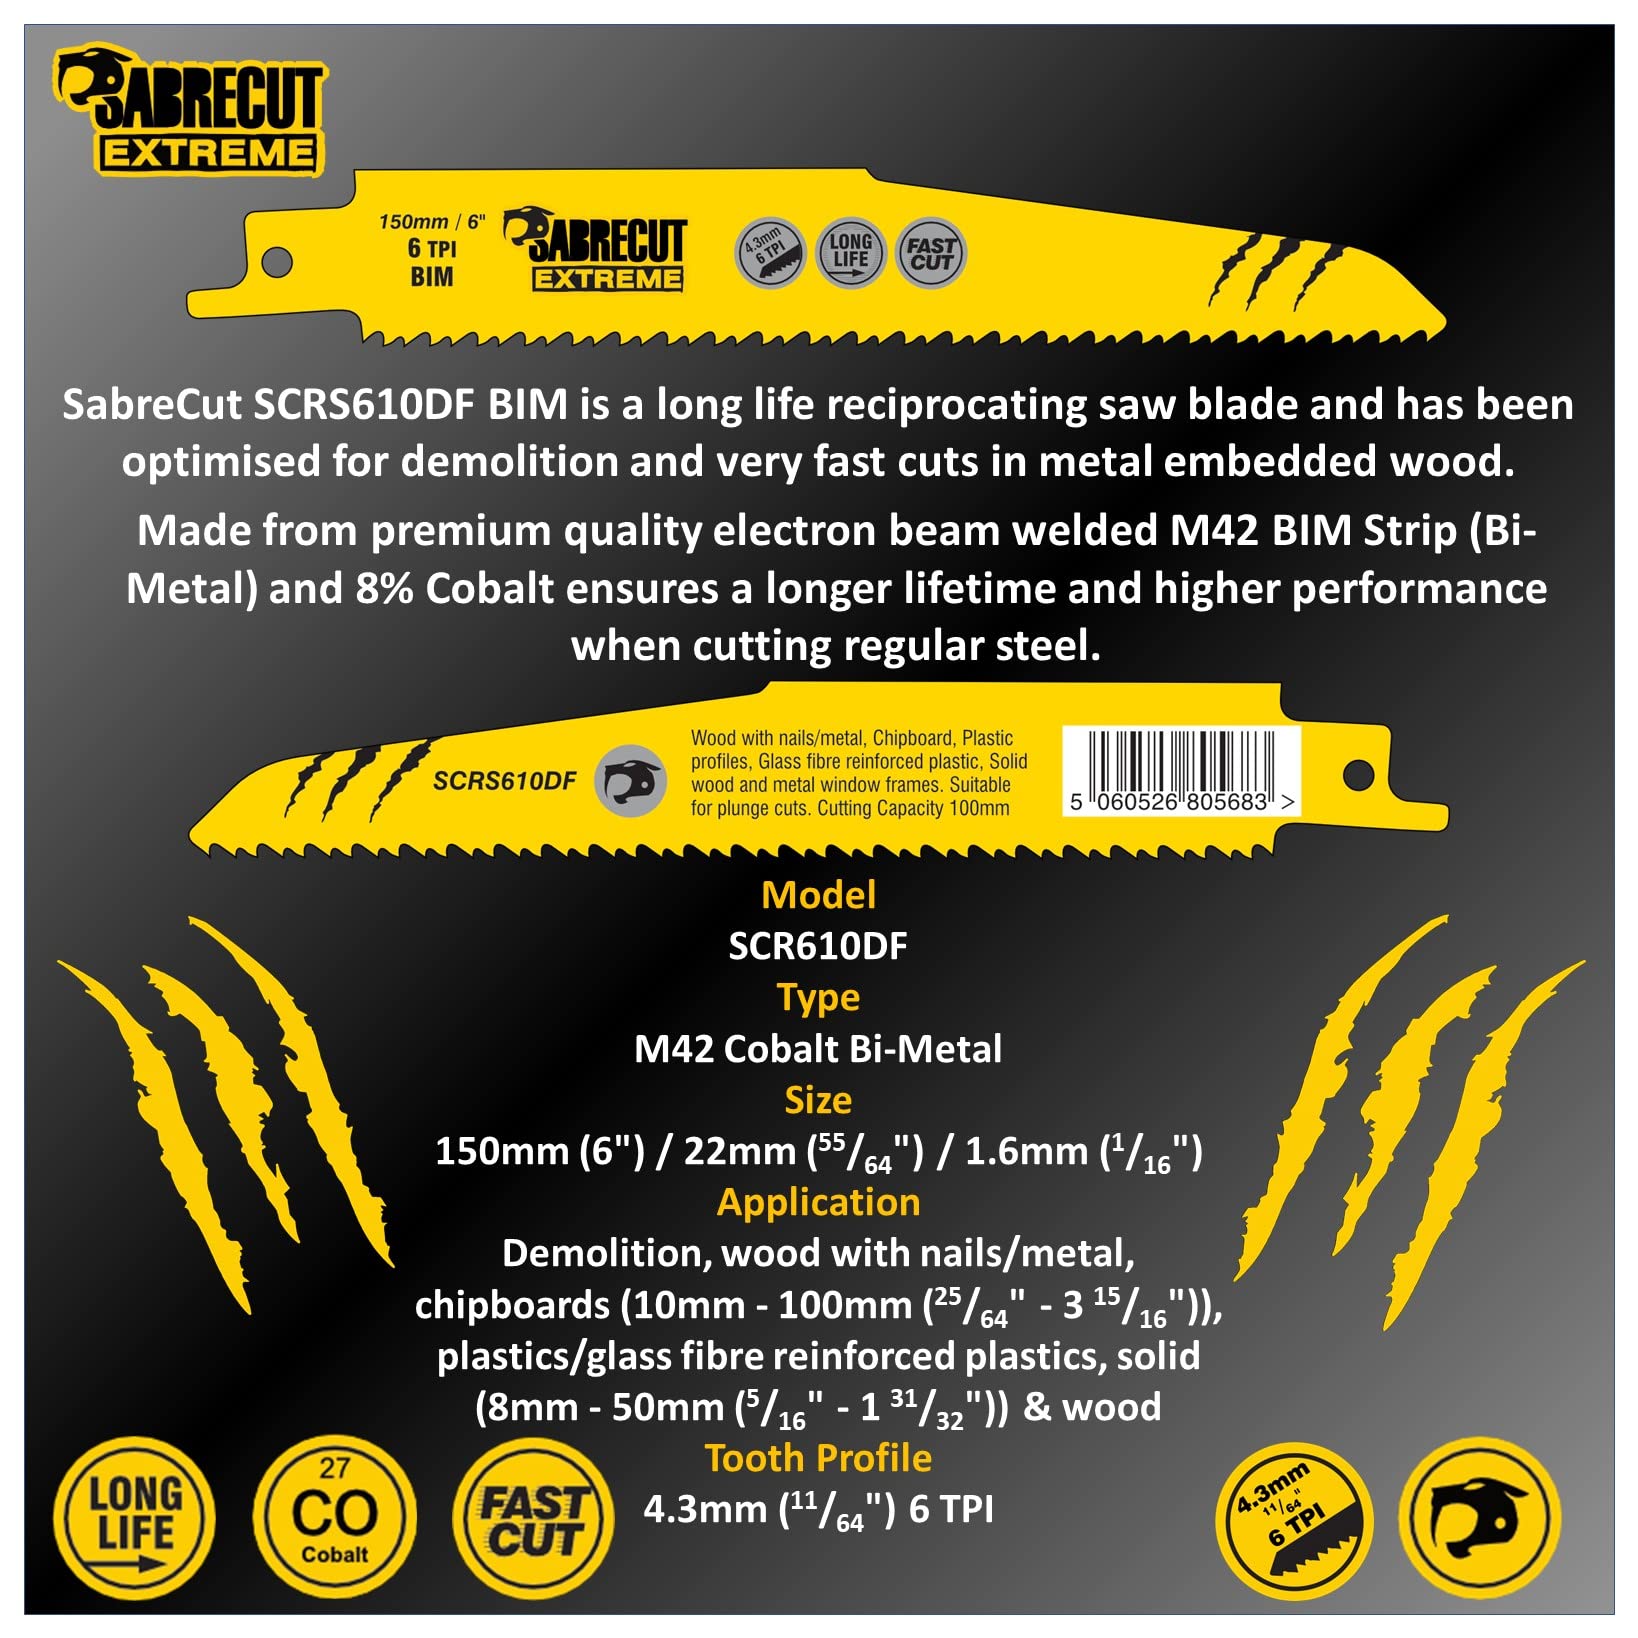 10 x SabreCut SCRS610DF_10 5 15/16" (150mm) 6 TPI S610DF Fast Wood and Metal Cutting Reciprocating Sabre Saw Blades Compatible with Bosch Dewalt Makita and many others